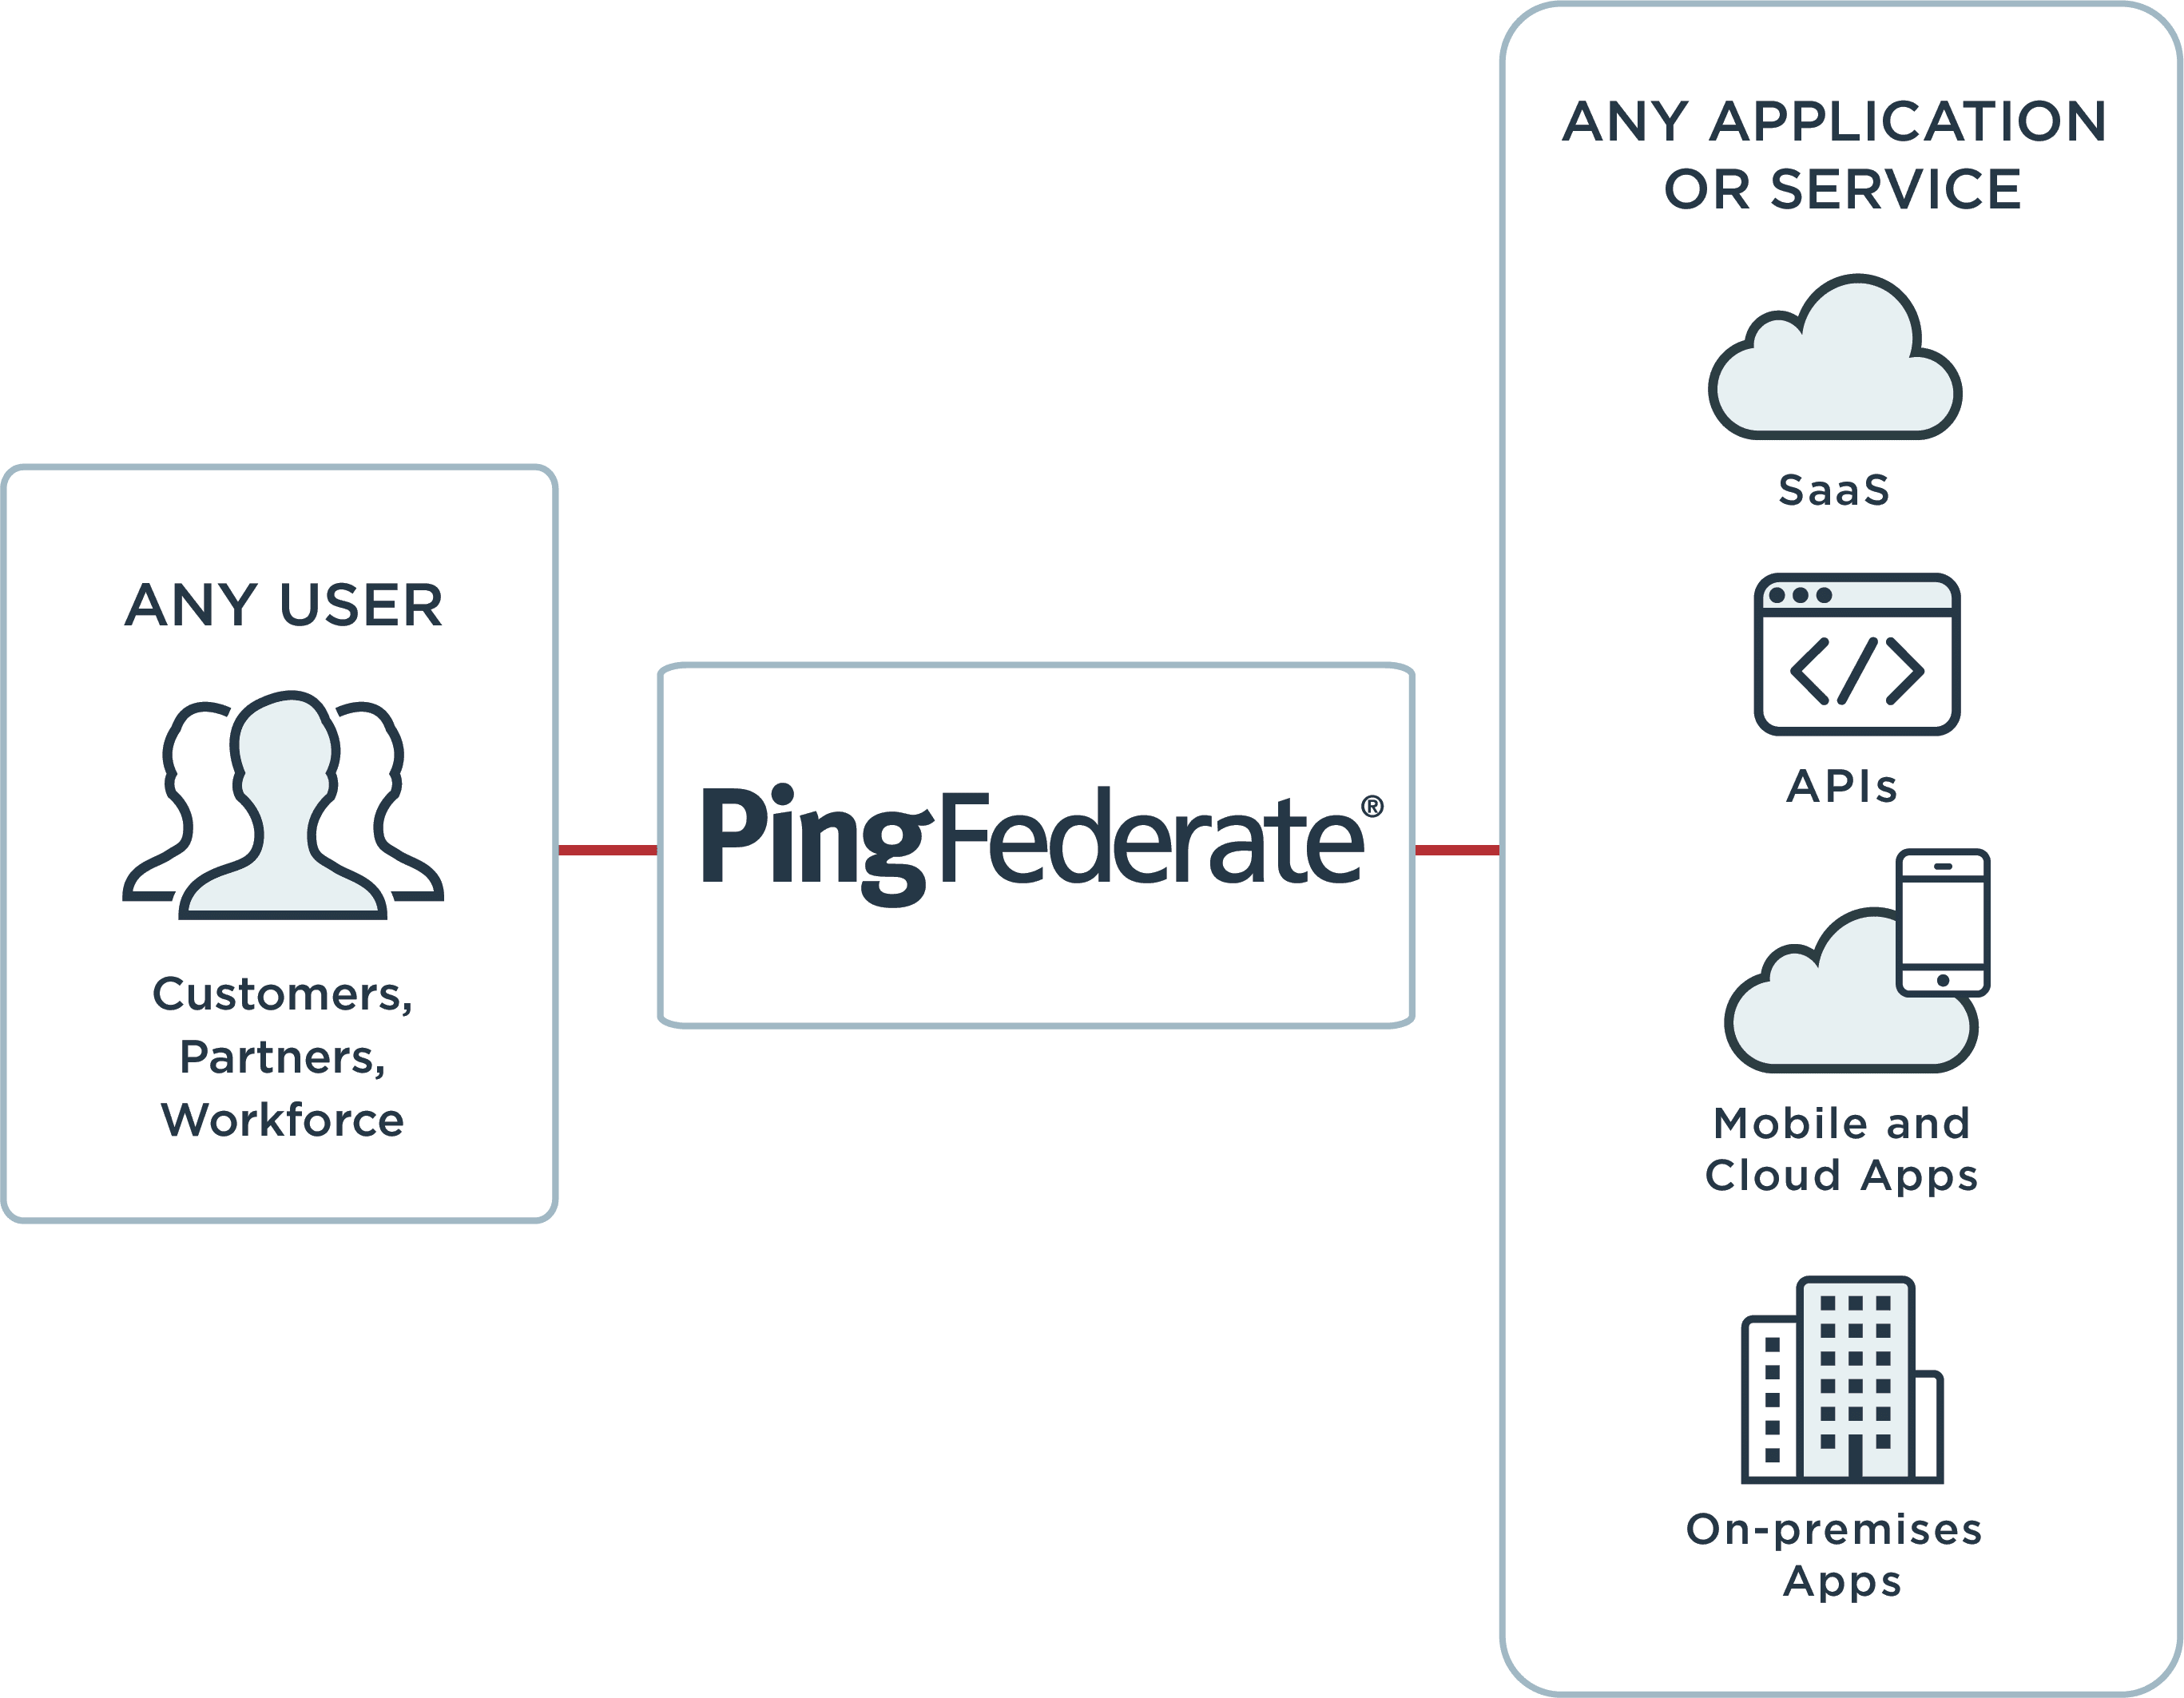 Using PingFederate, any user can connect to any application or service. 